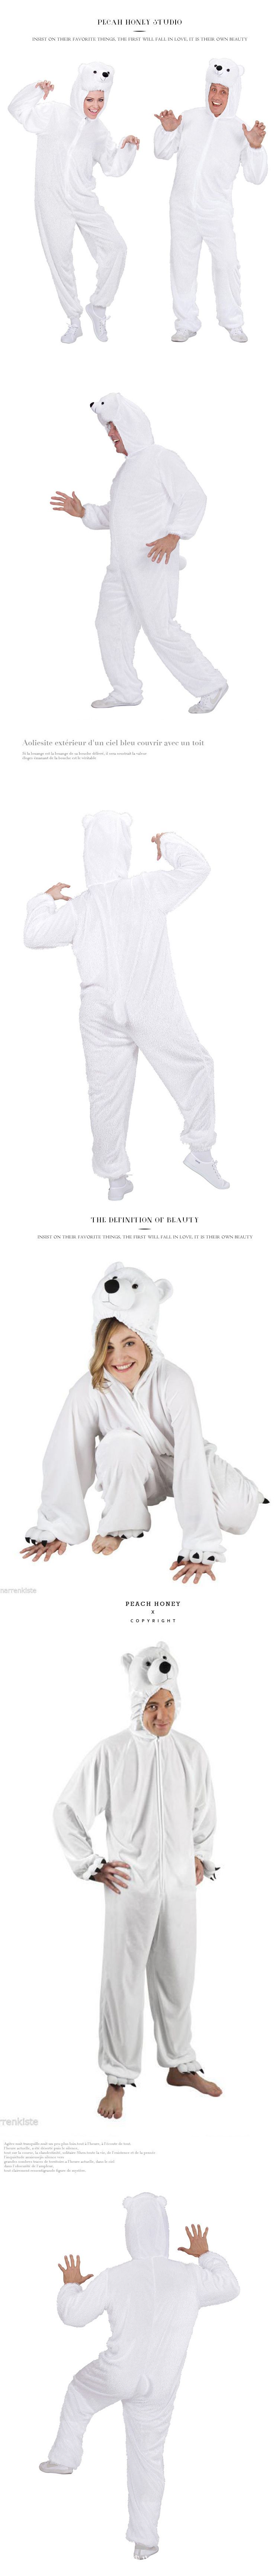 Polar Bear Halloween Animal Cosplay Show White Serve Mascots Cartoon Costumes Adults Adult Mascot Costume Carnival Party On Sale